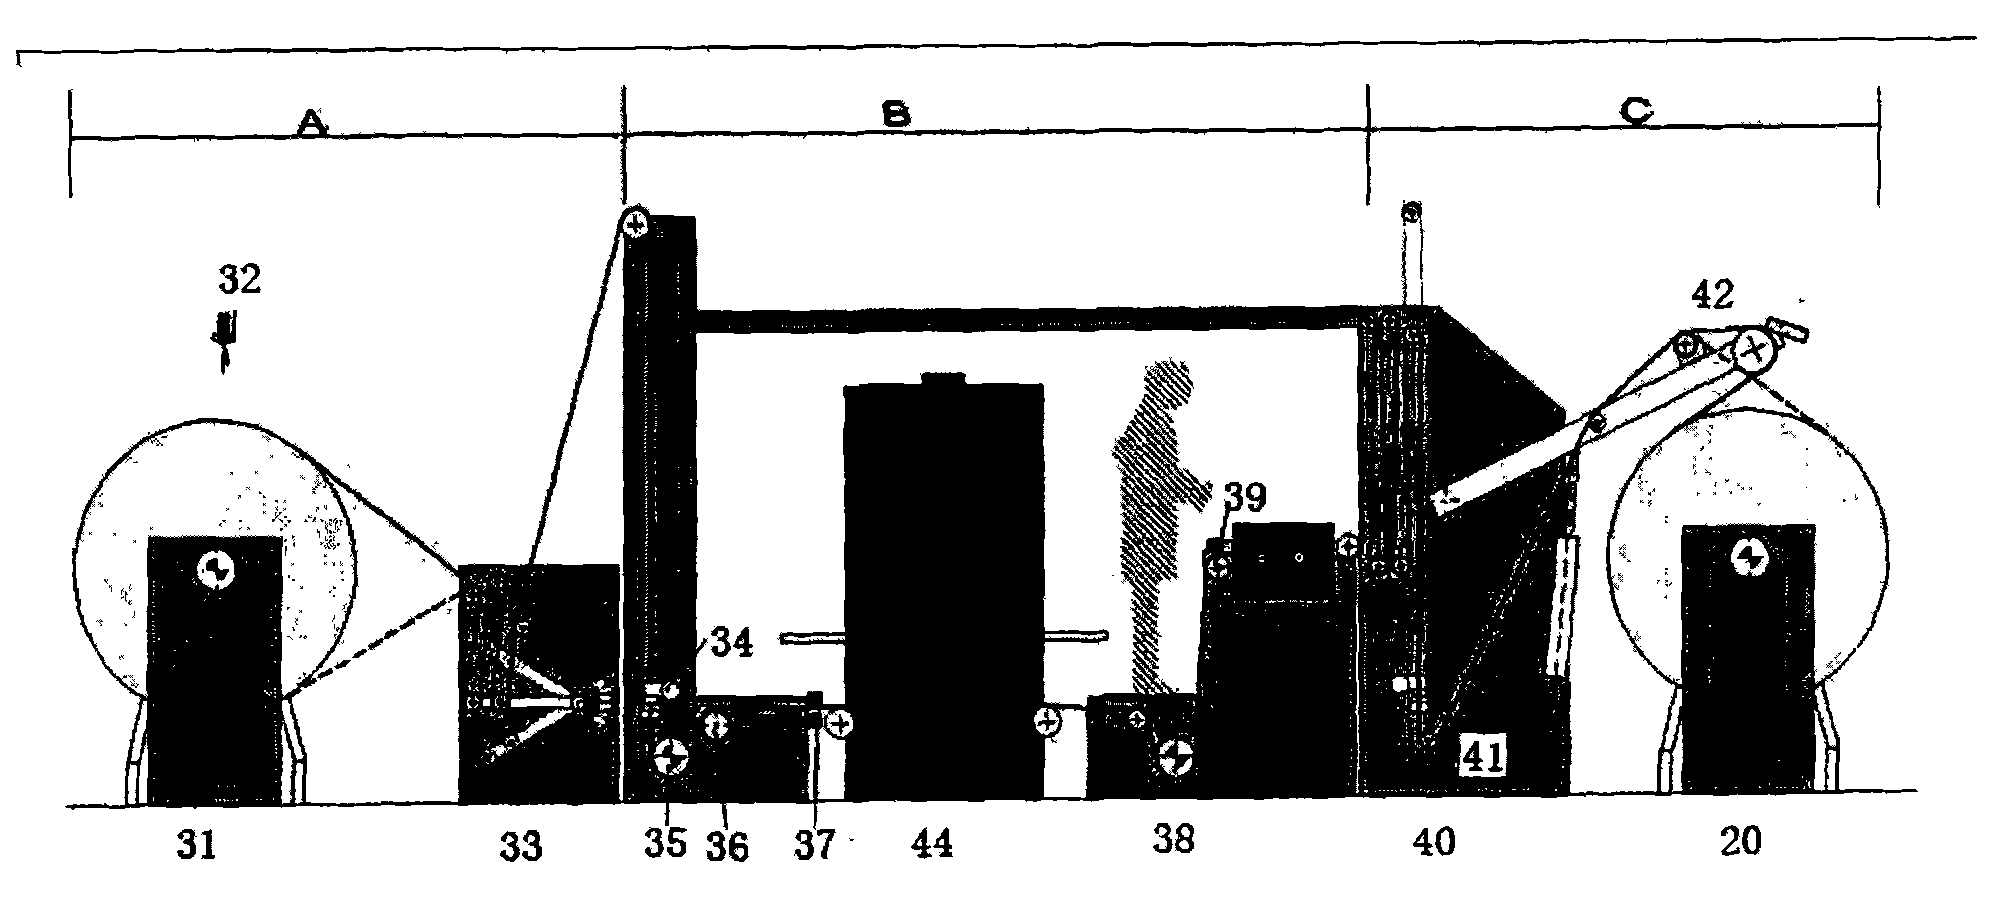 Defect marking method and device for cloth inspecting machine